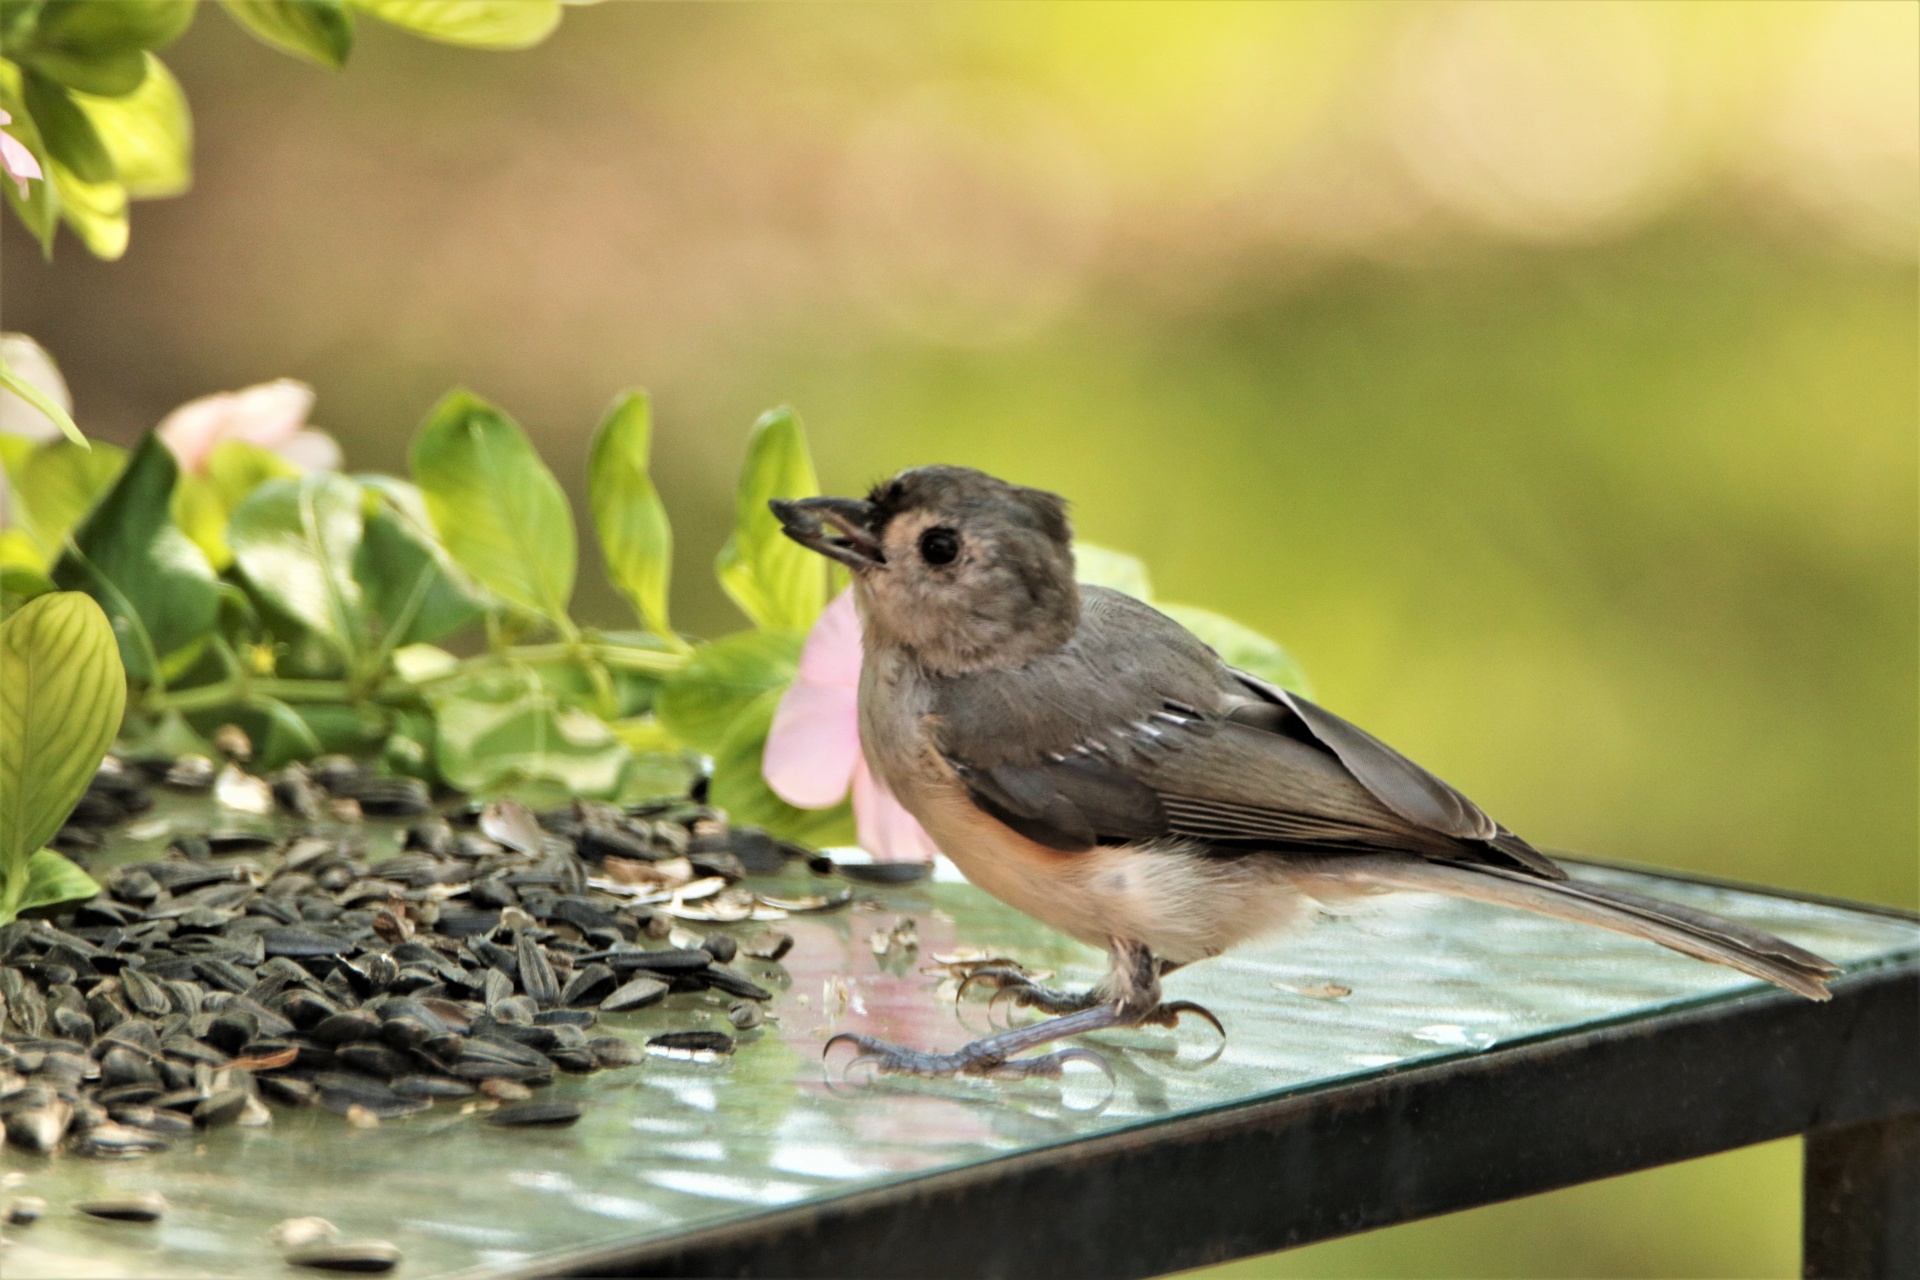 Close-up of a young tufted titmouse on an outdoor table, eating sunflower seeds.